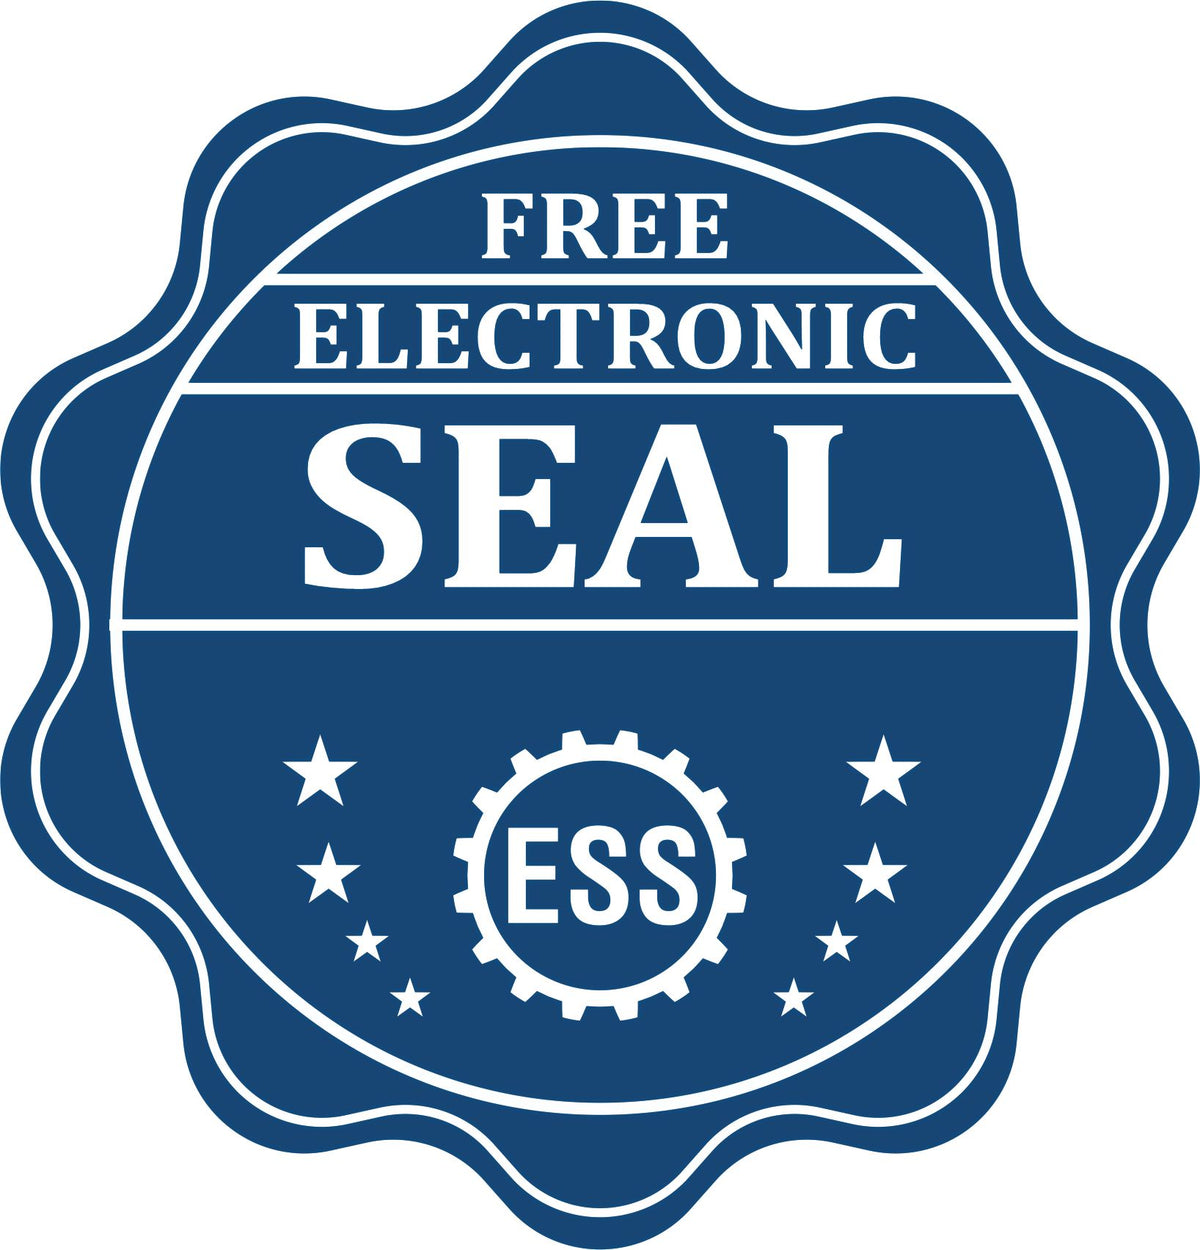 A badge showing a free electronic seal for the Soft Vermont Professional Geologist Seal with stars and the ESS gear on the emblem.